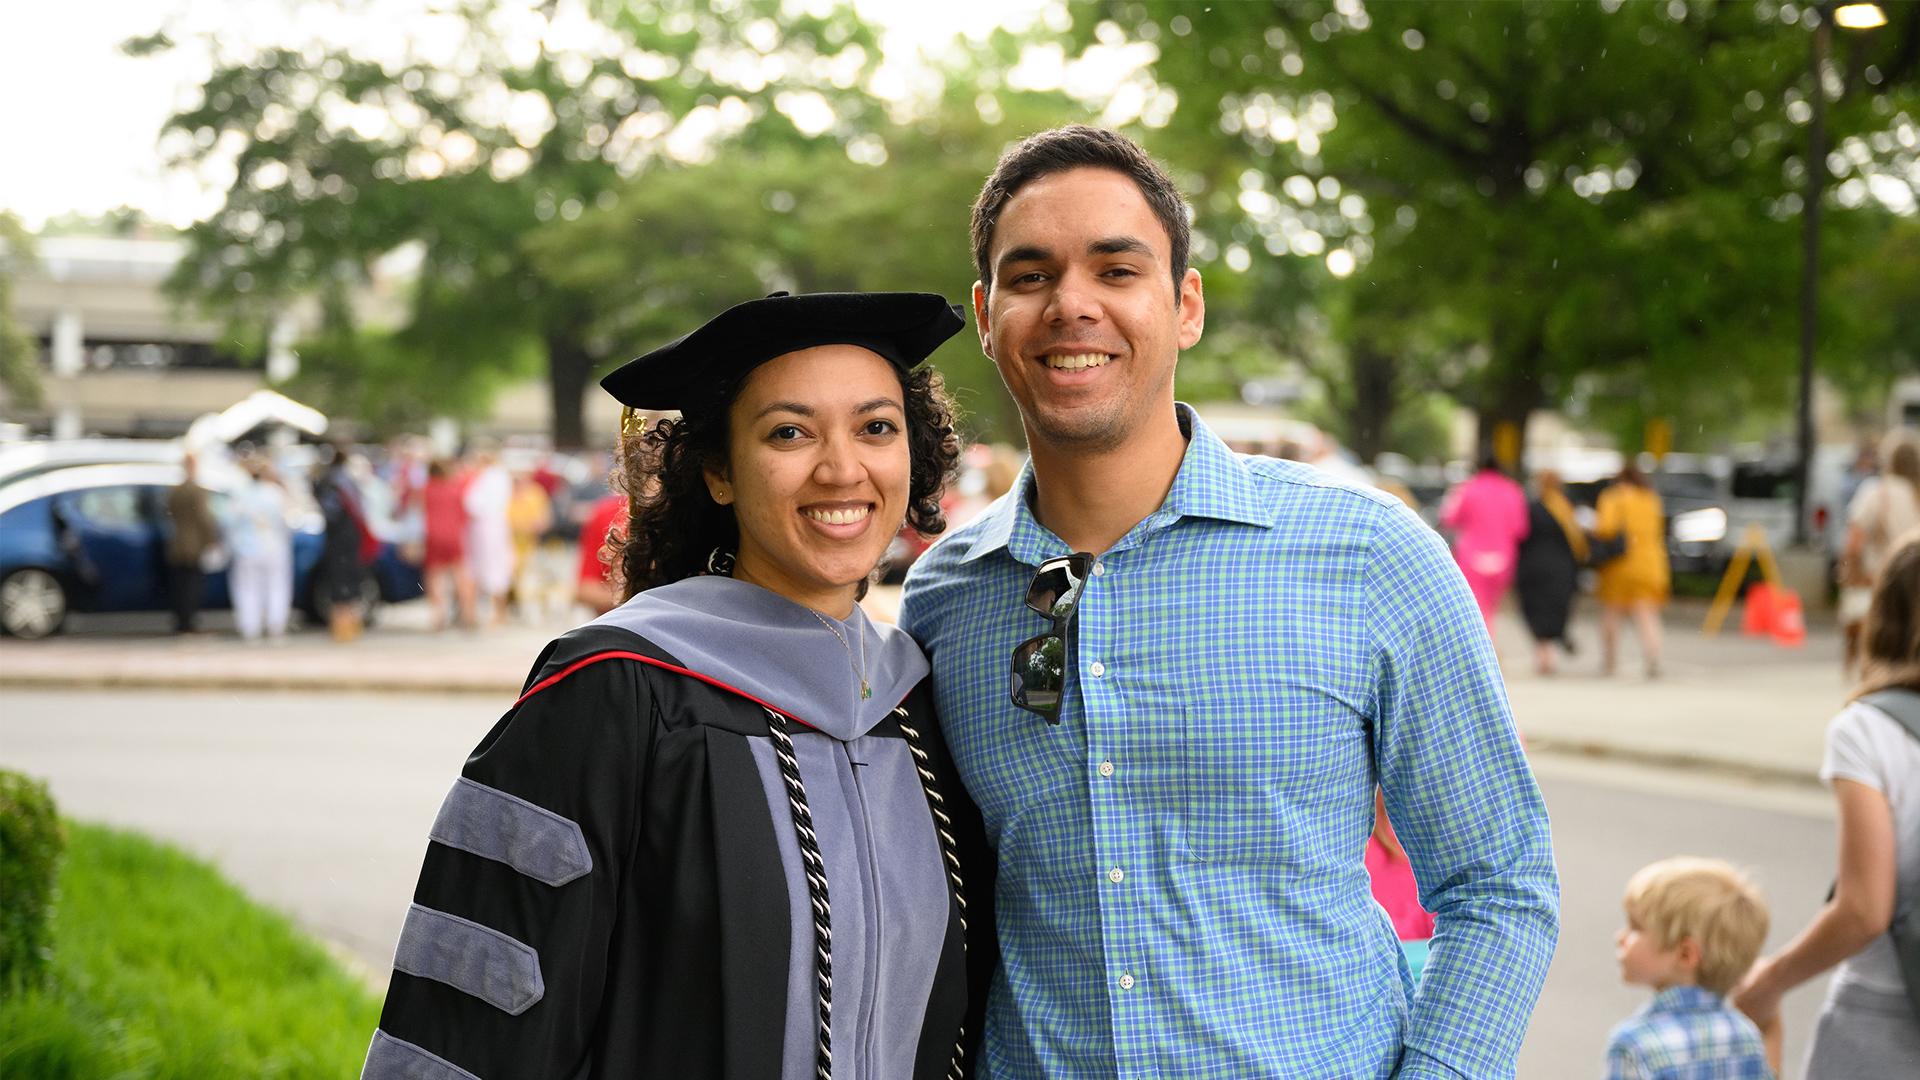 A recent graduate attends the oath and hooding ceremony with friends and family.